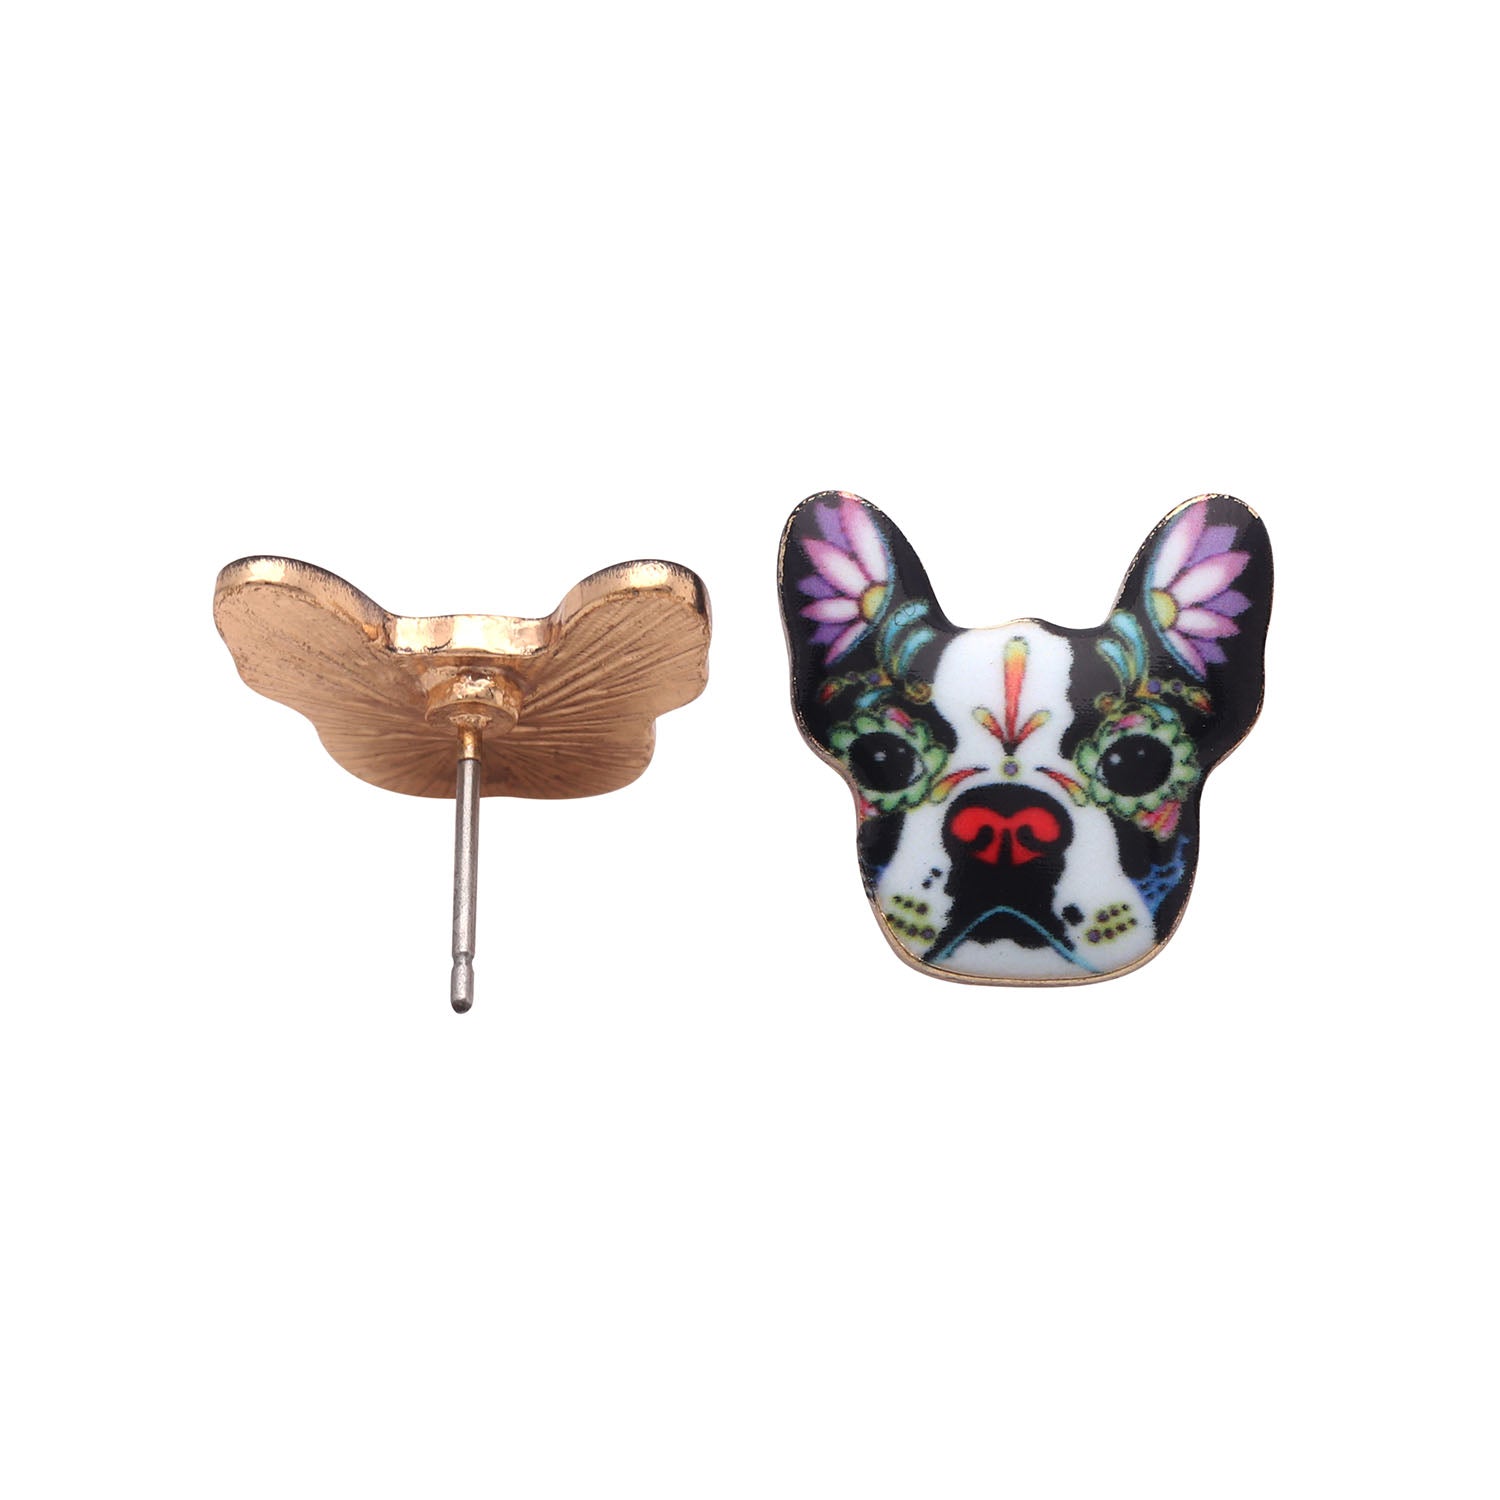 French Bulldog Boston Terrier Stud Earrings Enamel Colorful From the Ginger Lyne Collection - Style 1